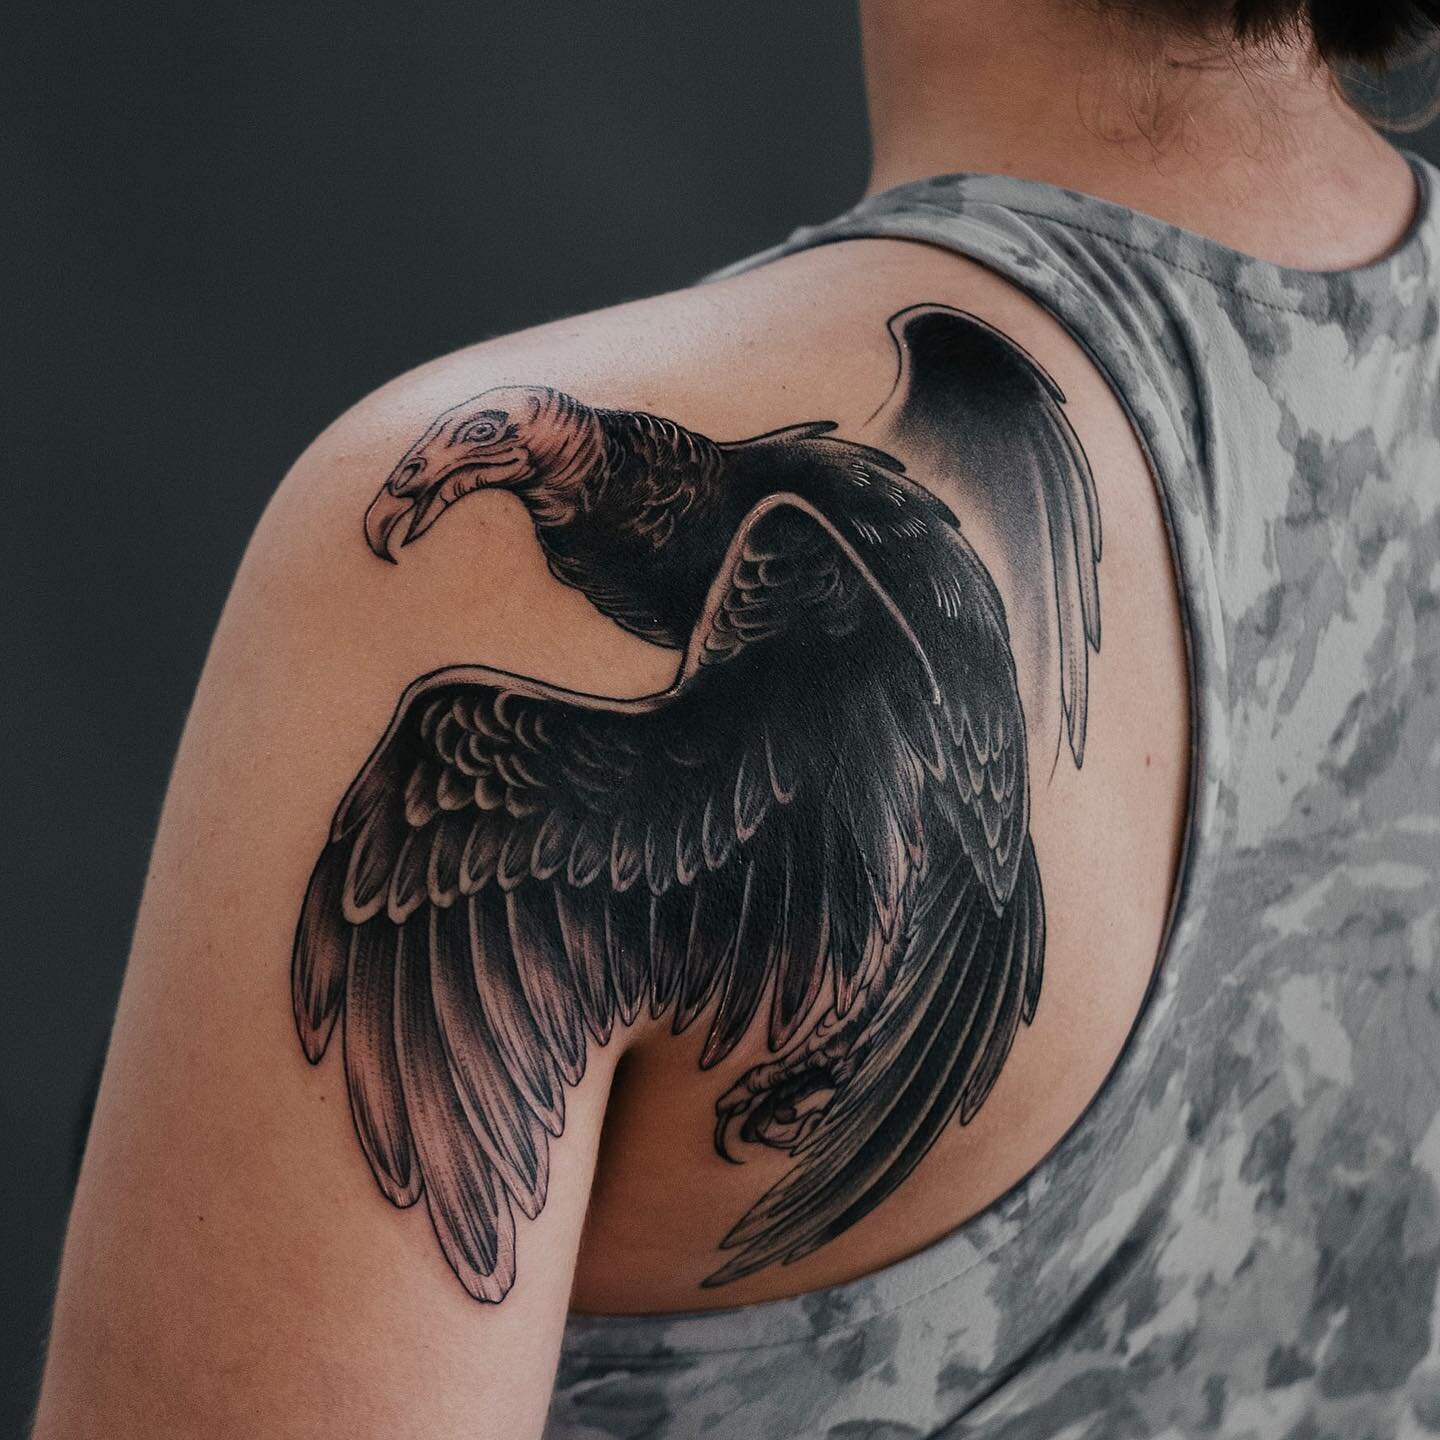 Cover up!! I love doing cover-ups, send me a DM with what you want covered!

Keep swiping to see the before!

#yyz #toronto #torontotattoo #torontotattooartist #coverup #coveruptattoo #turkeyvulture #condor #turkeyvulturetattoo #photography #aestheti